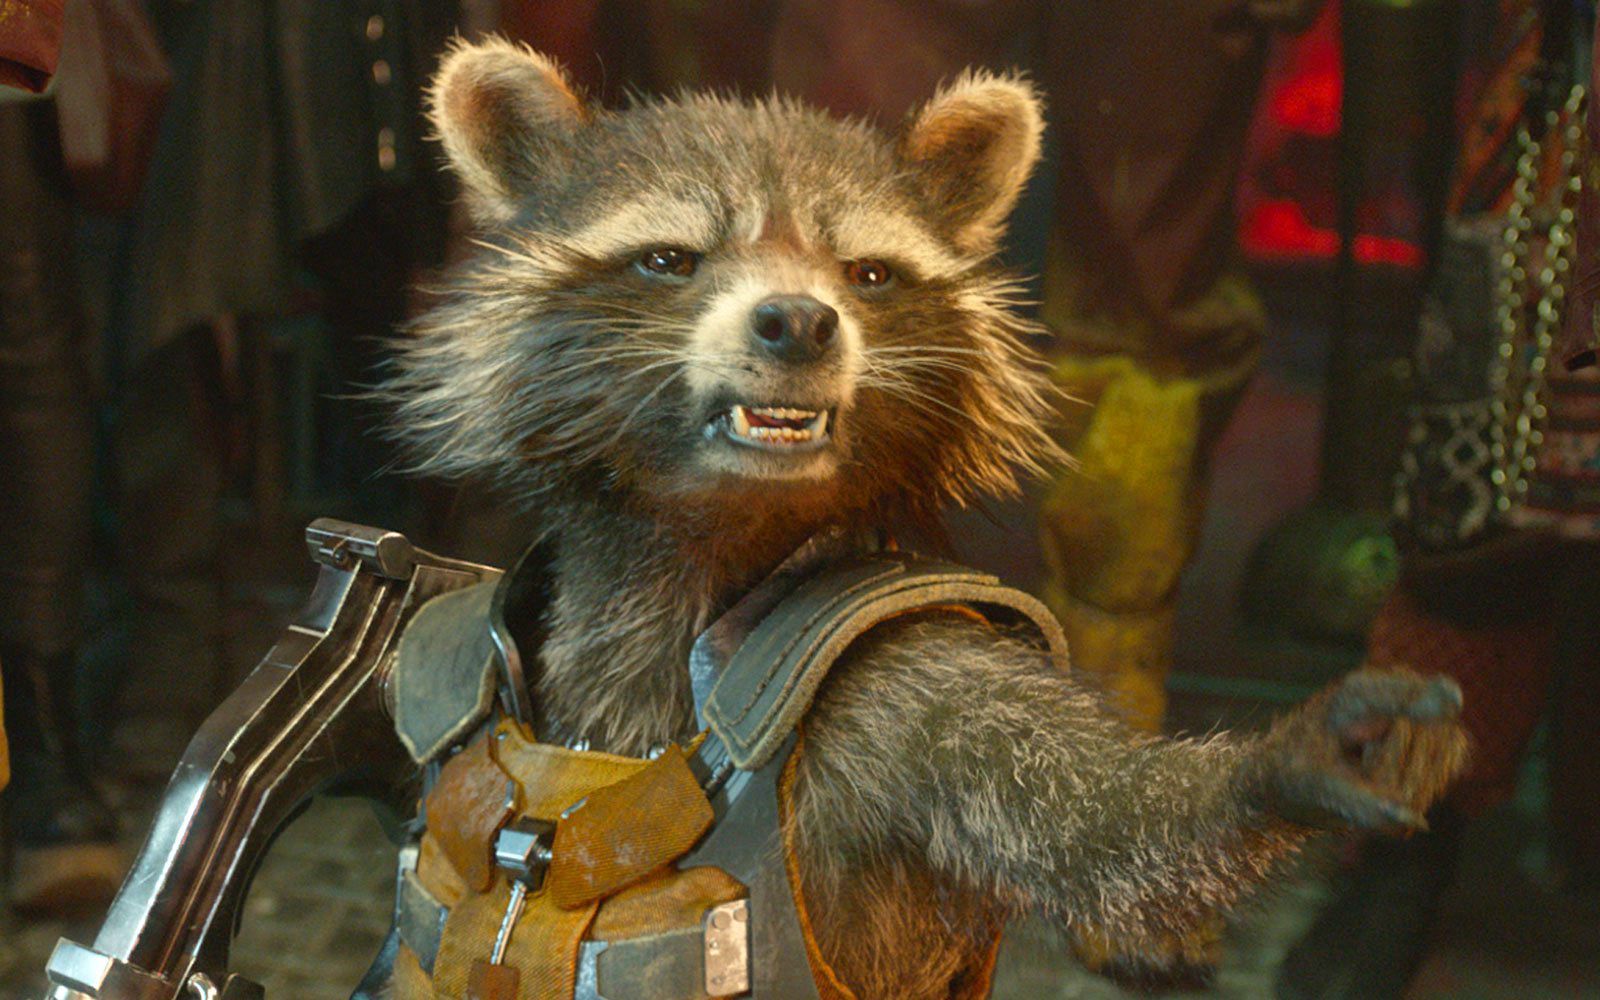 Why Guardians of the Galaxy Vol 2's Bradley Cooper doesn't play Rocket